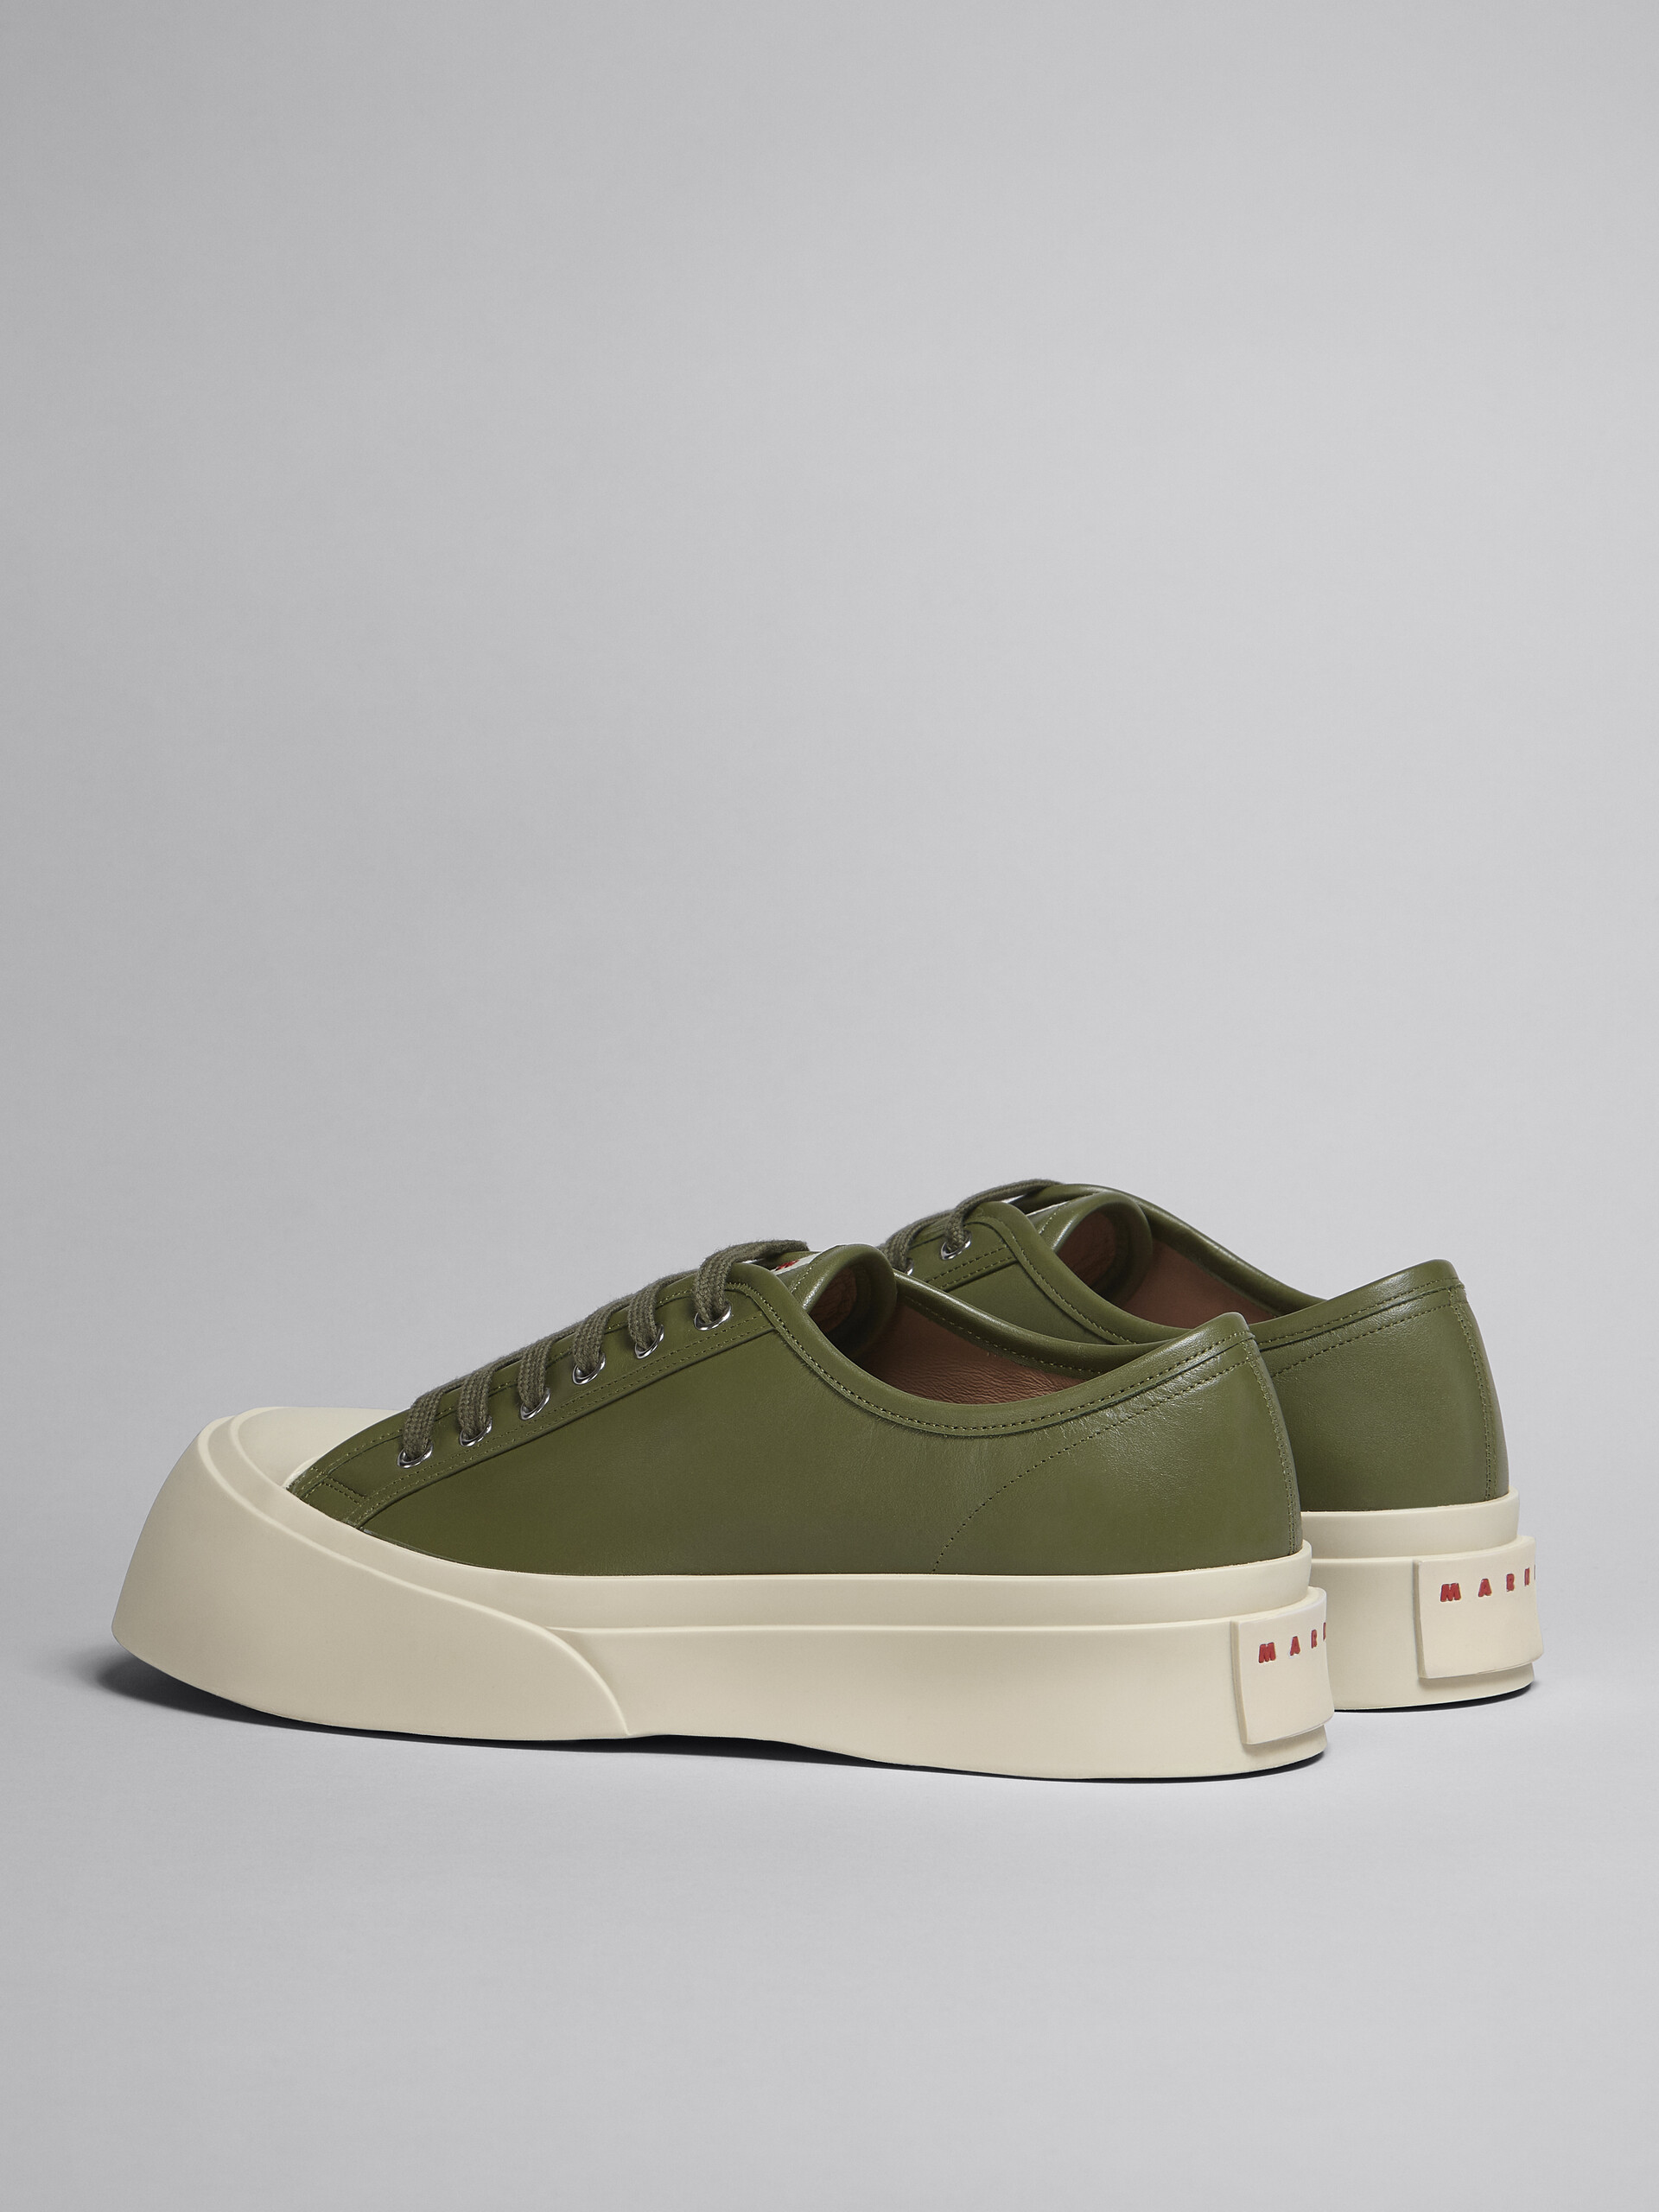 Green soft calf leather PABLO sneaker - Sneakers - Image 3